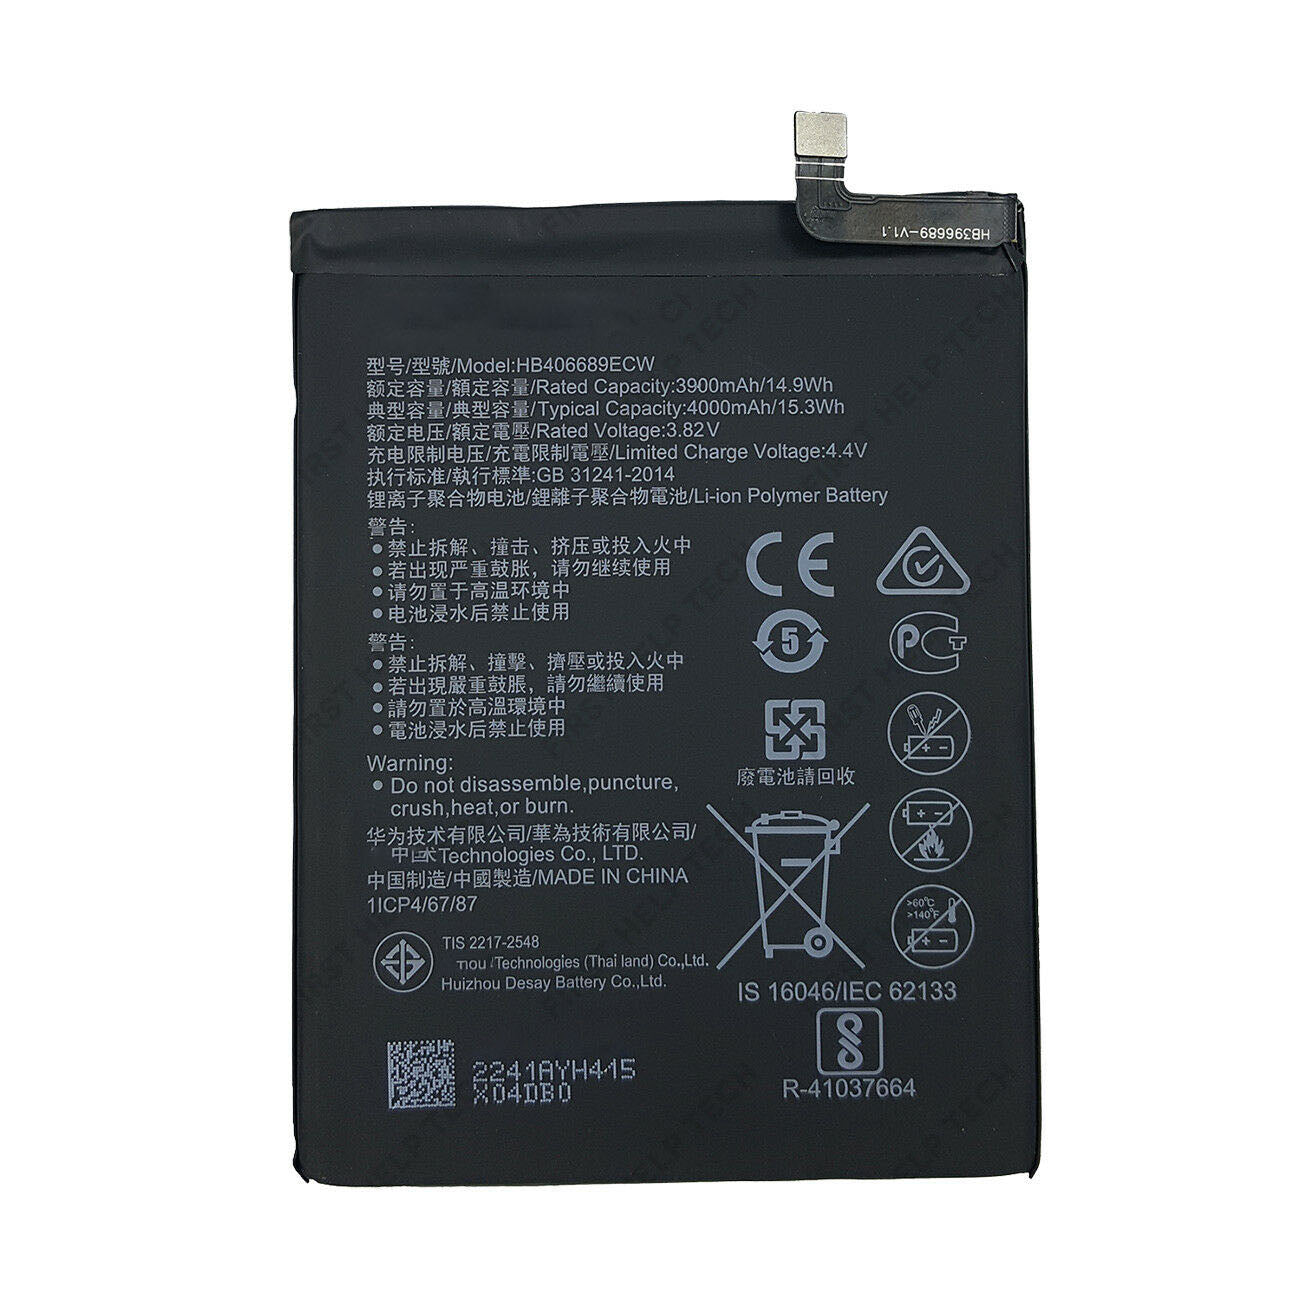 Replacement Battery For Huawei Y7 2017 / Y7 Prime 2017 - HB396689ECW